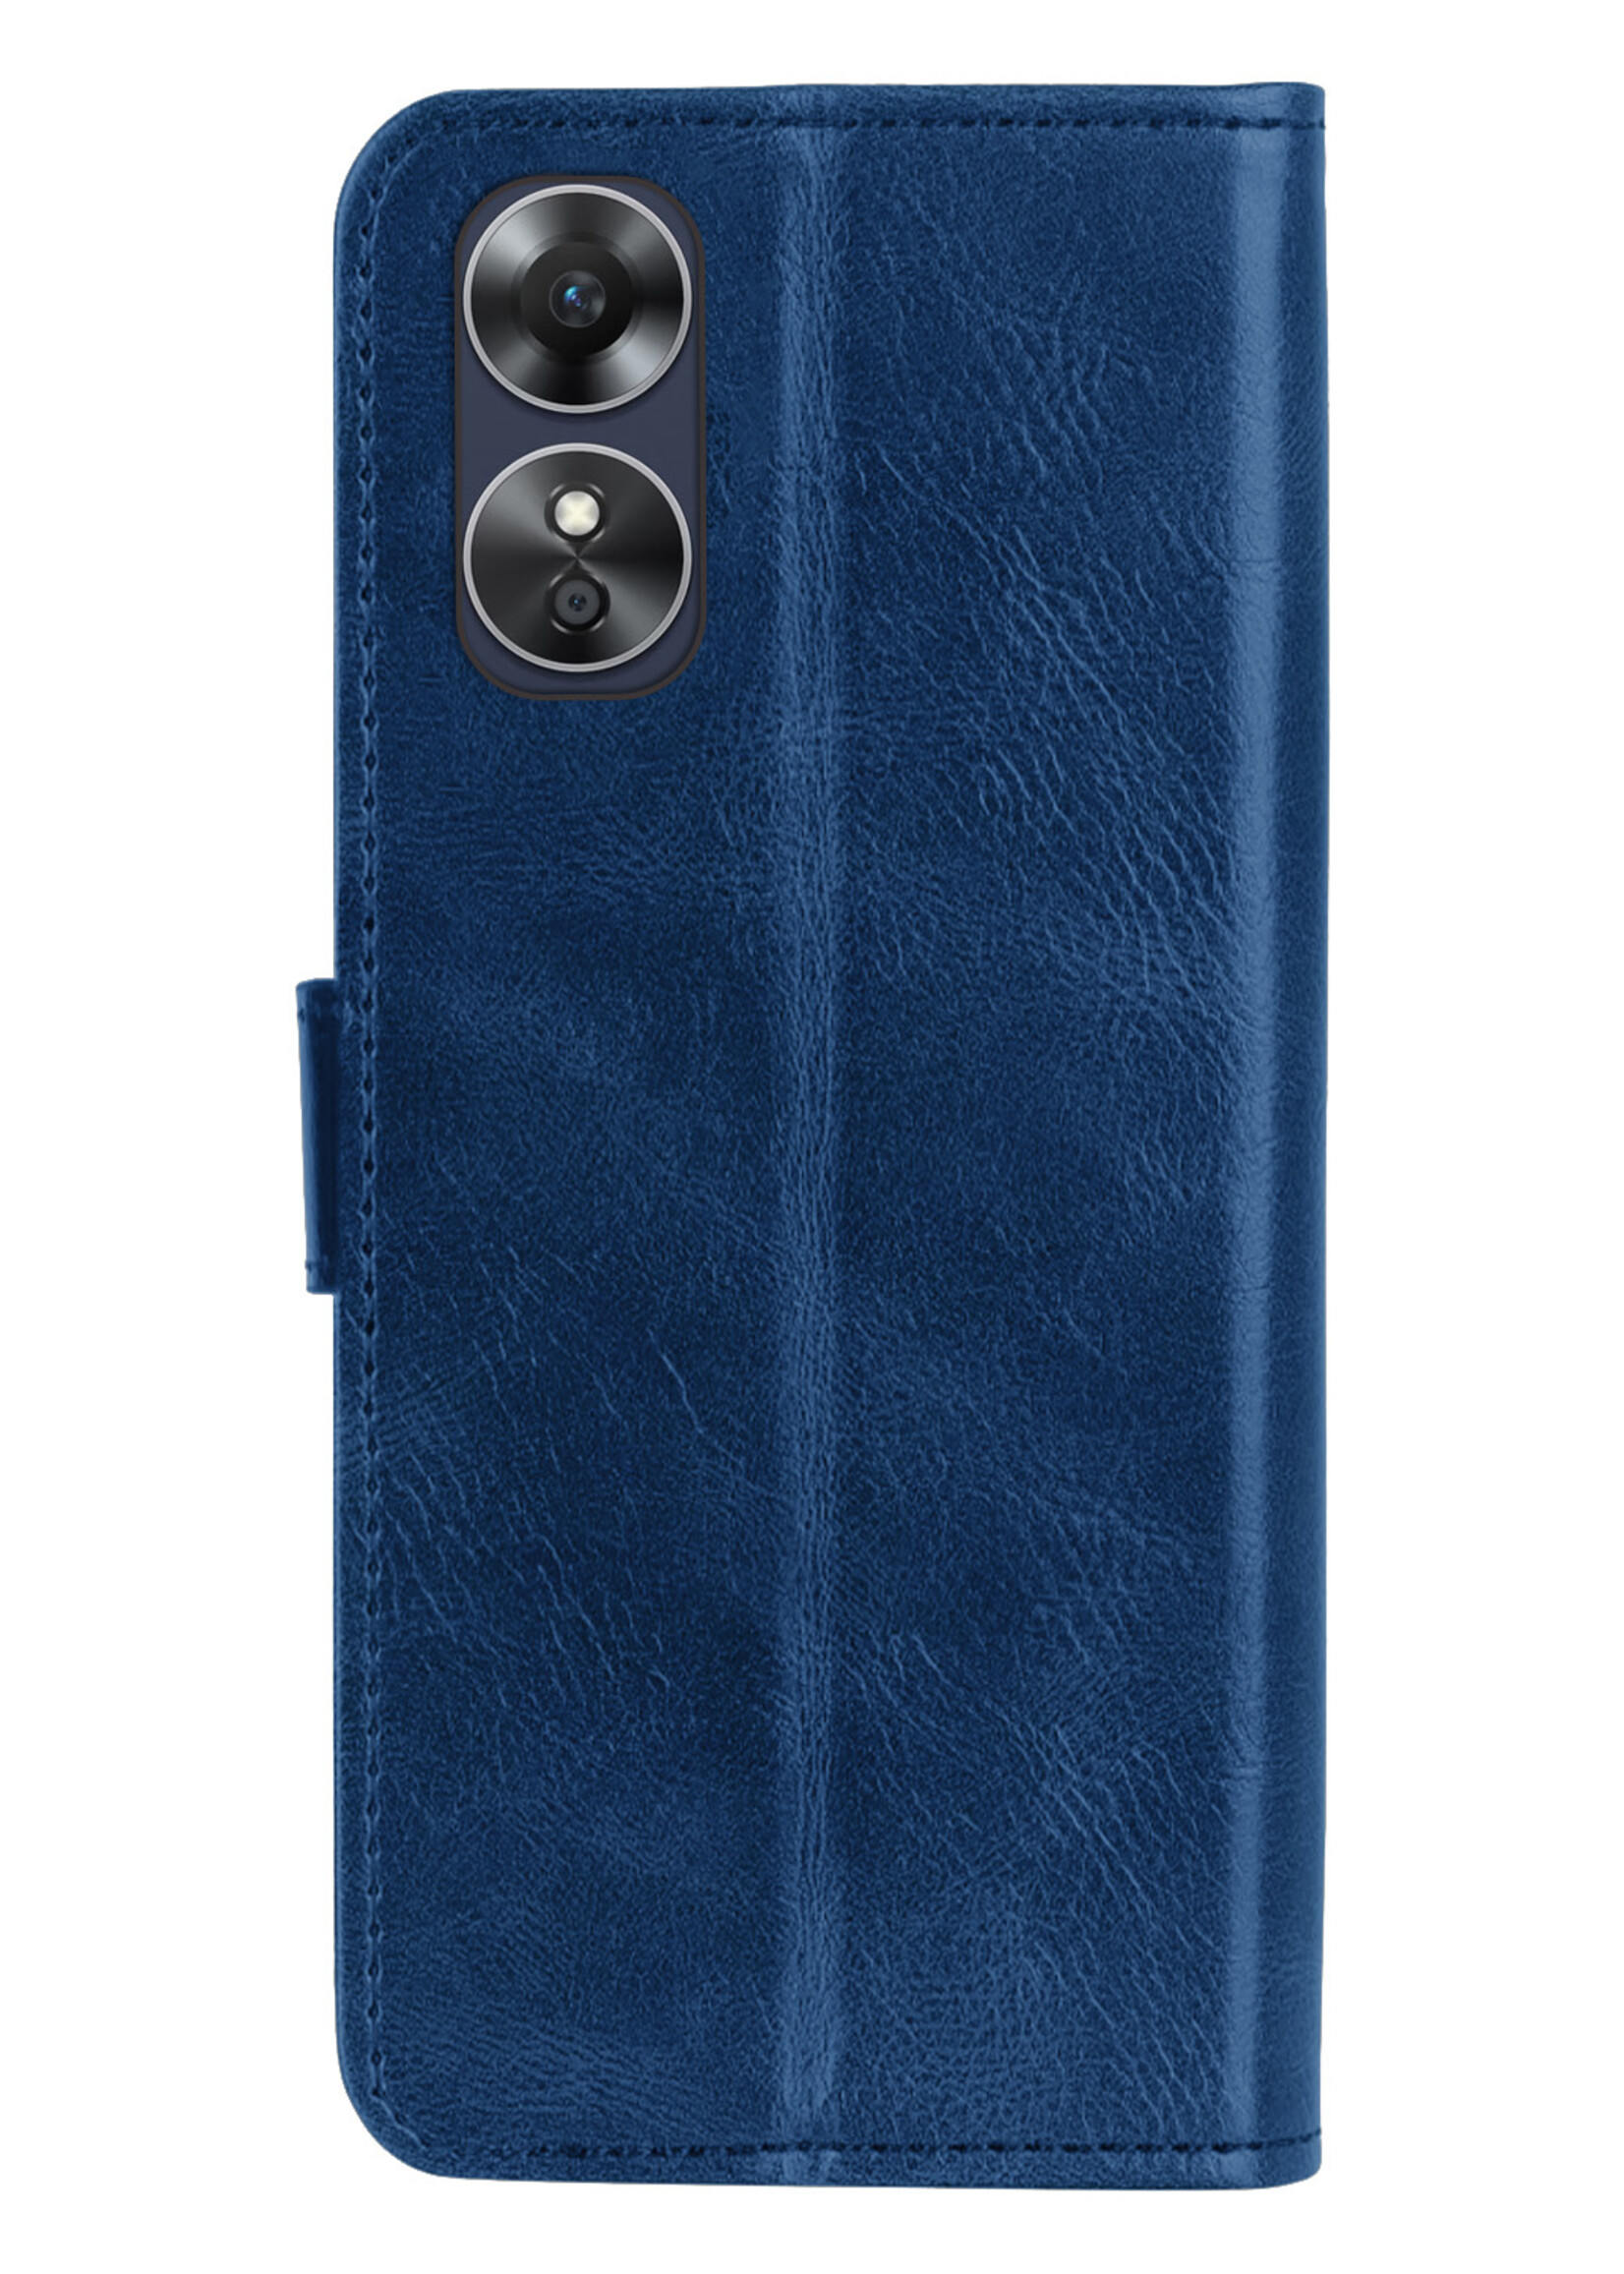 BTH Oppo A17 Hoesje Book Case Hoes Portemonnee Cover Walletcase - Oppo A17 Hoes Bookcase Hoesje - Donkerblauw